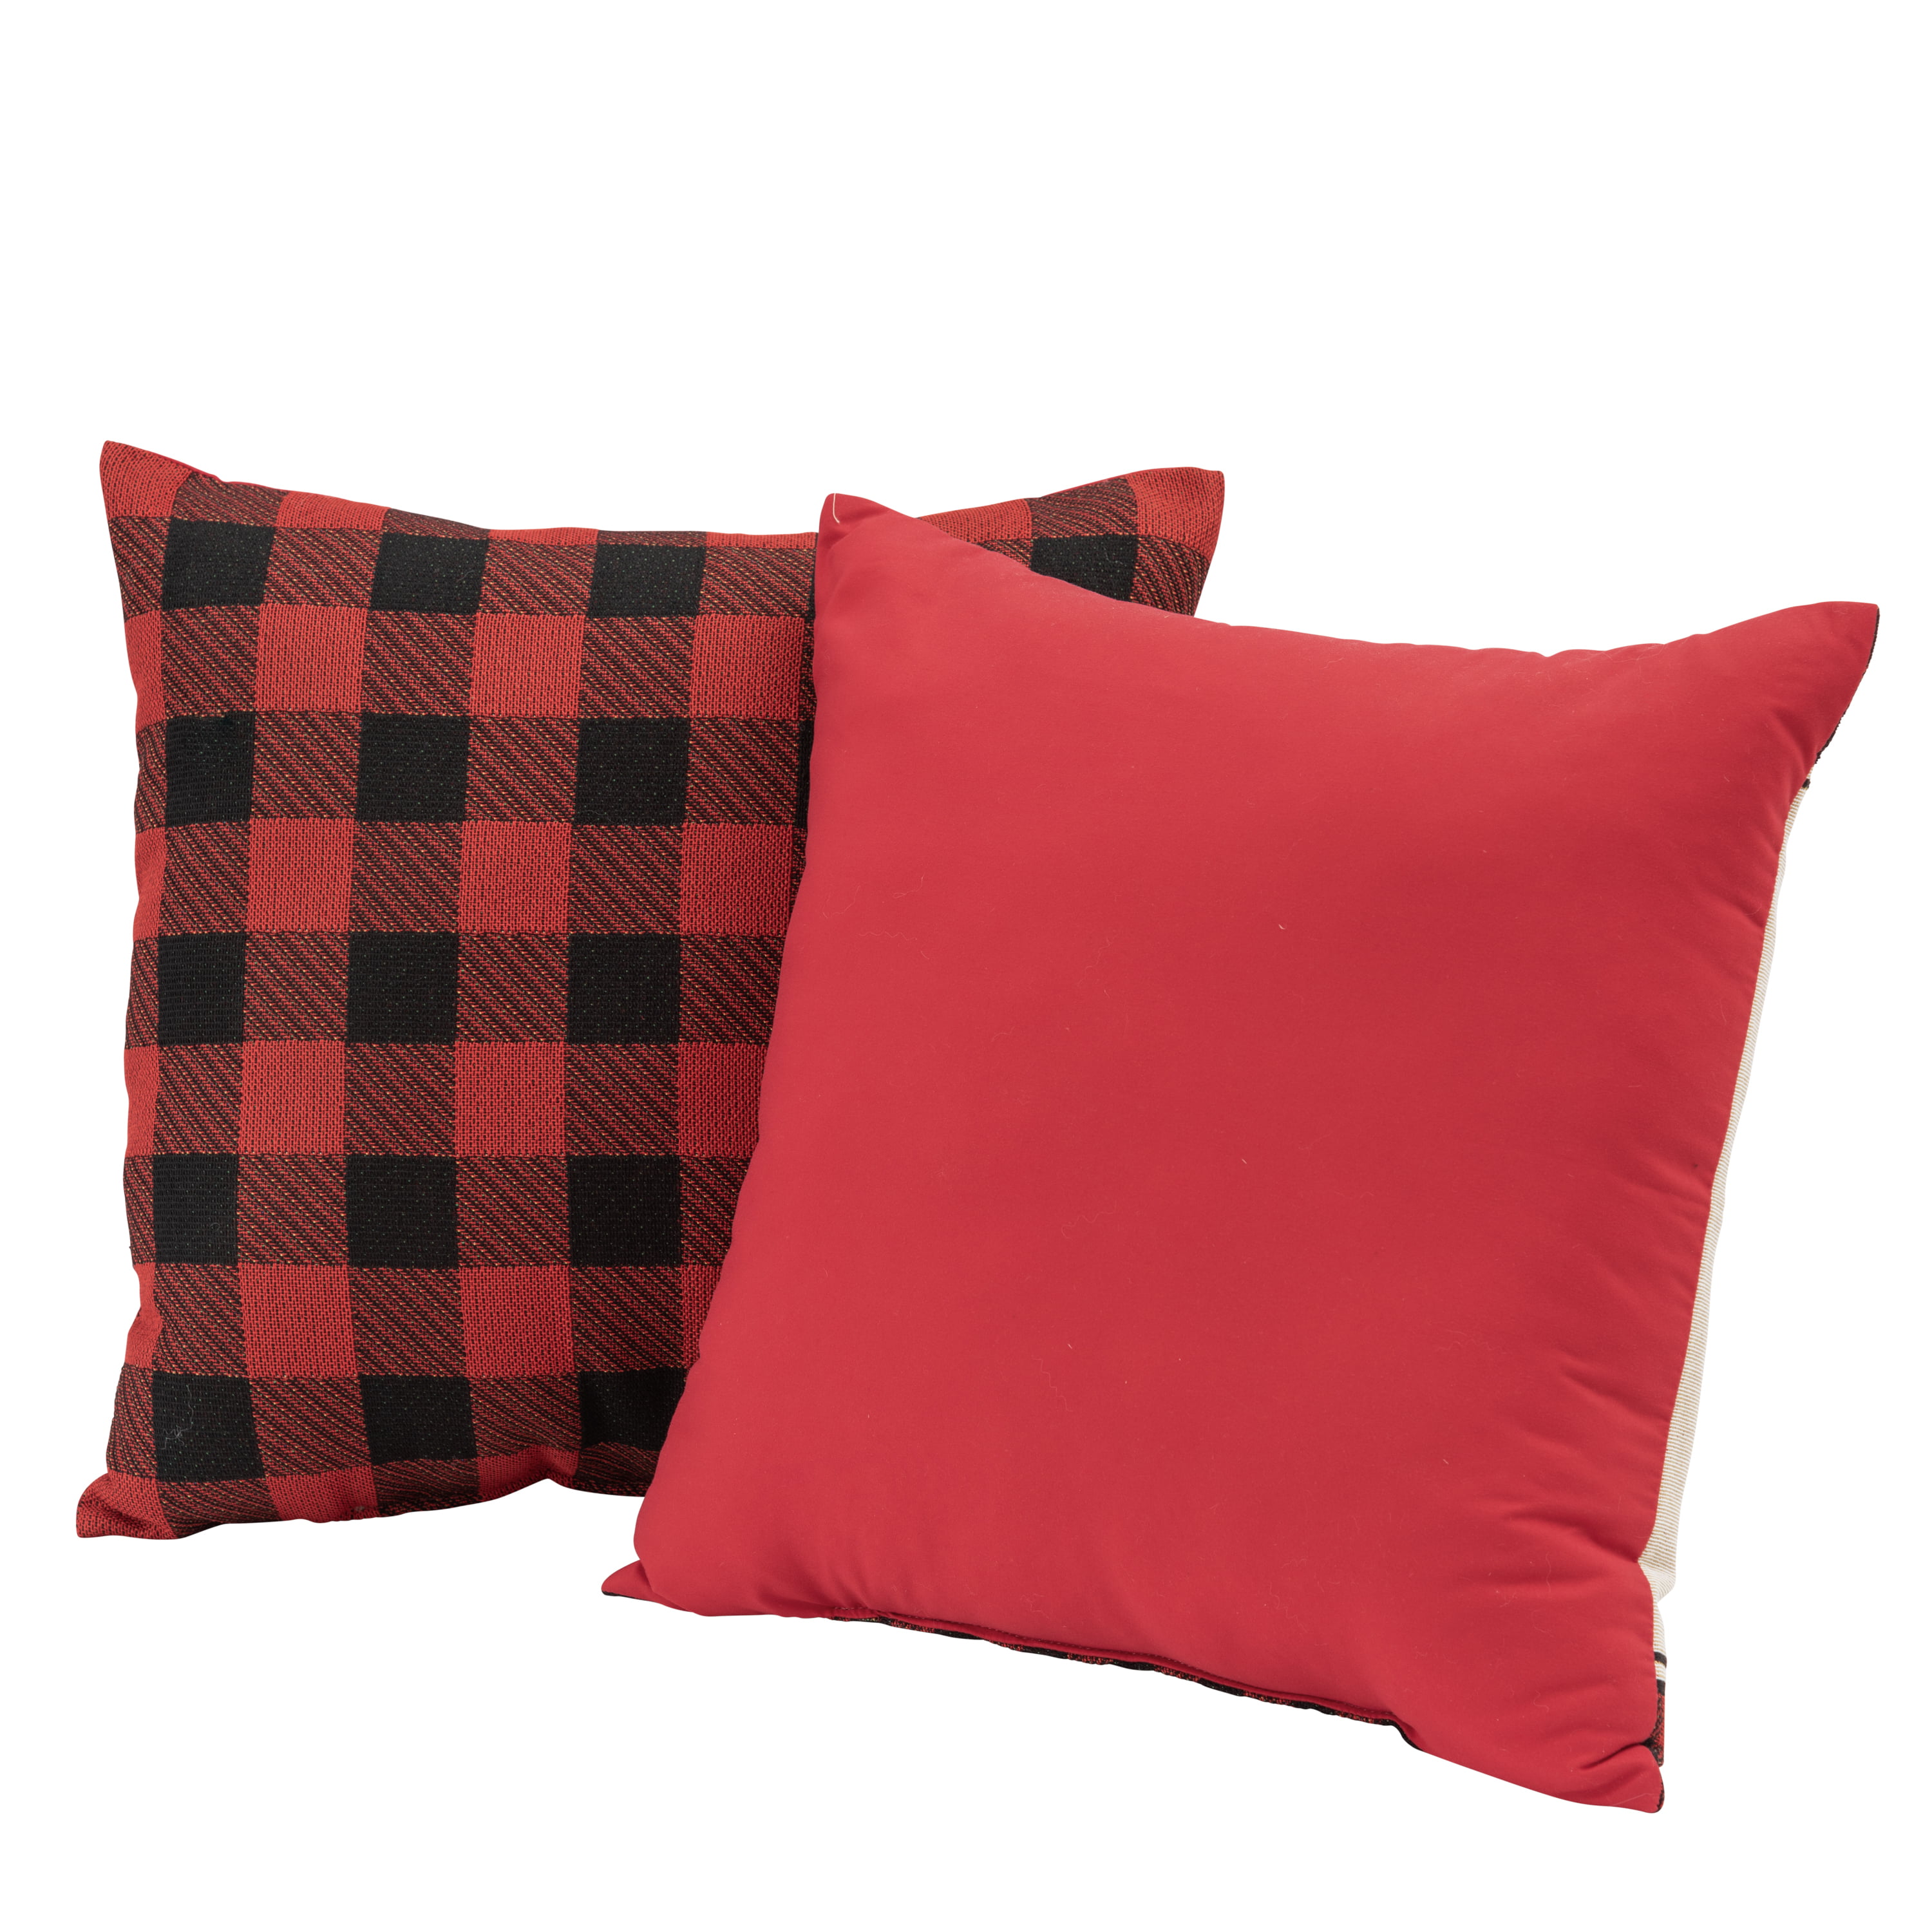 Design Imports Buffalo Check Set of 4 Pillow Covers Red & Black